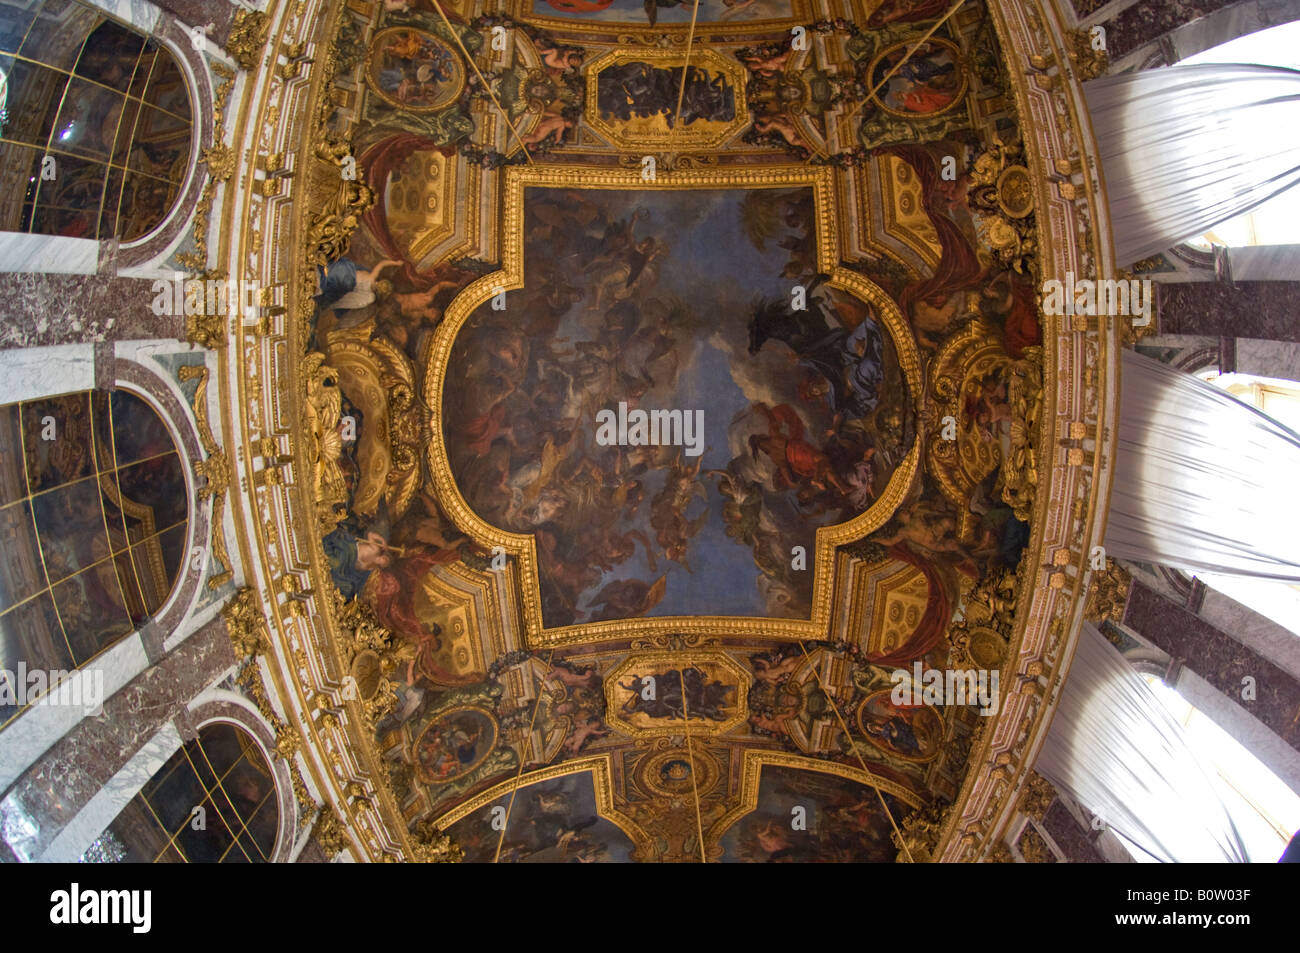 Wide Angle View Of The Ceiling In The Hall Of Mirrors Palace Of